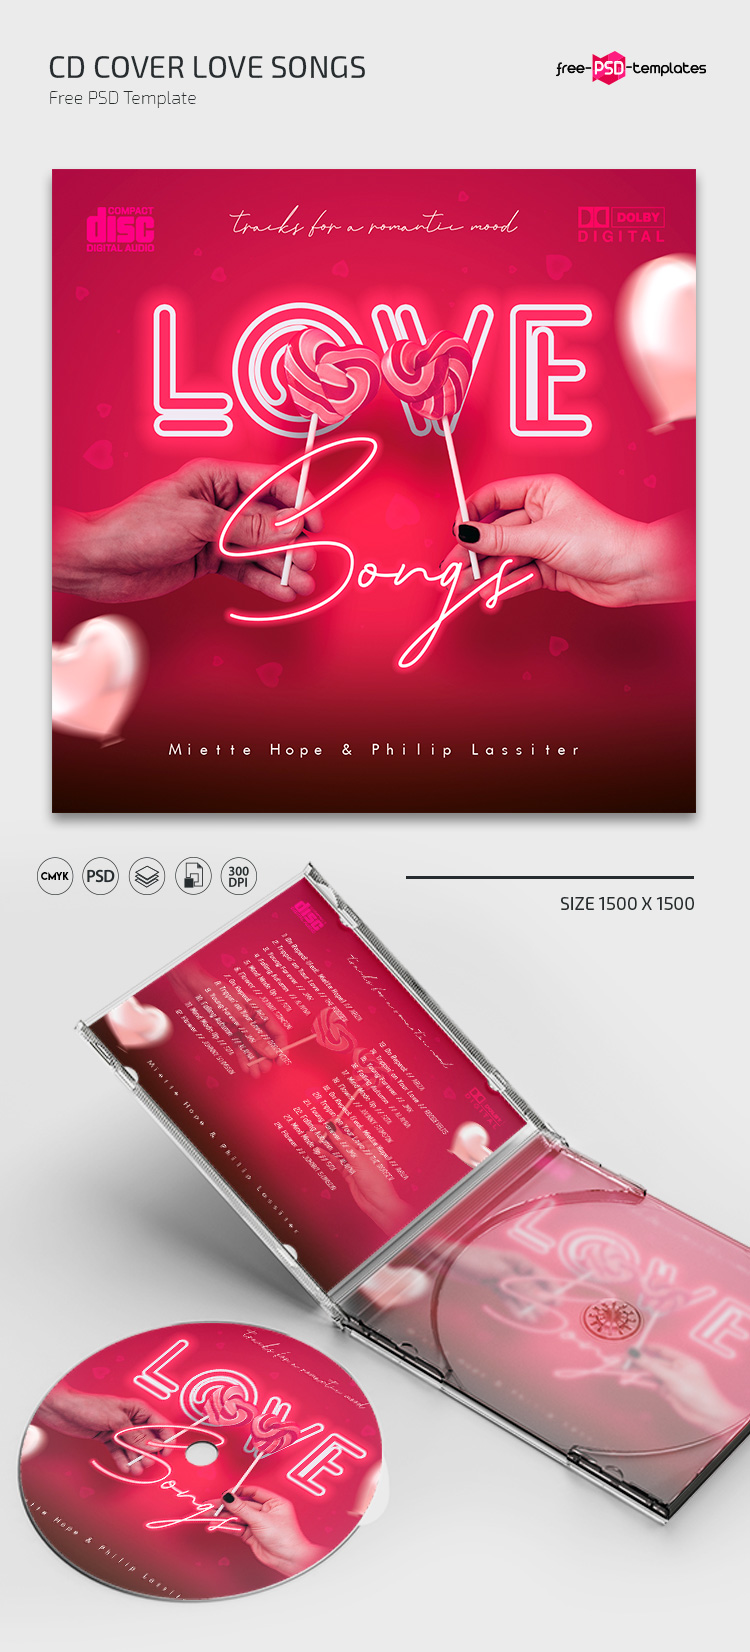 Detail Cd Cover Design Template Psd Free Download Nomer 16